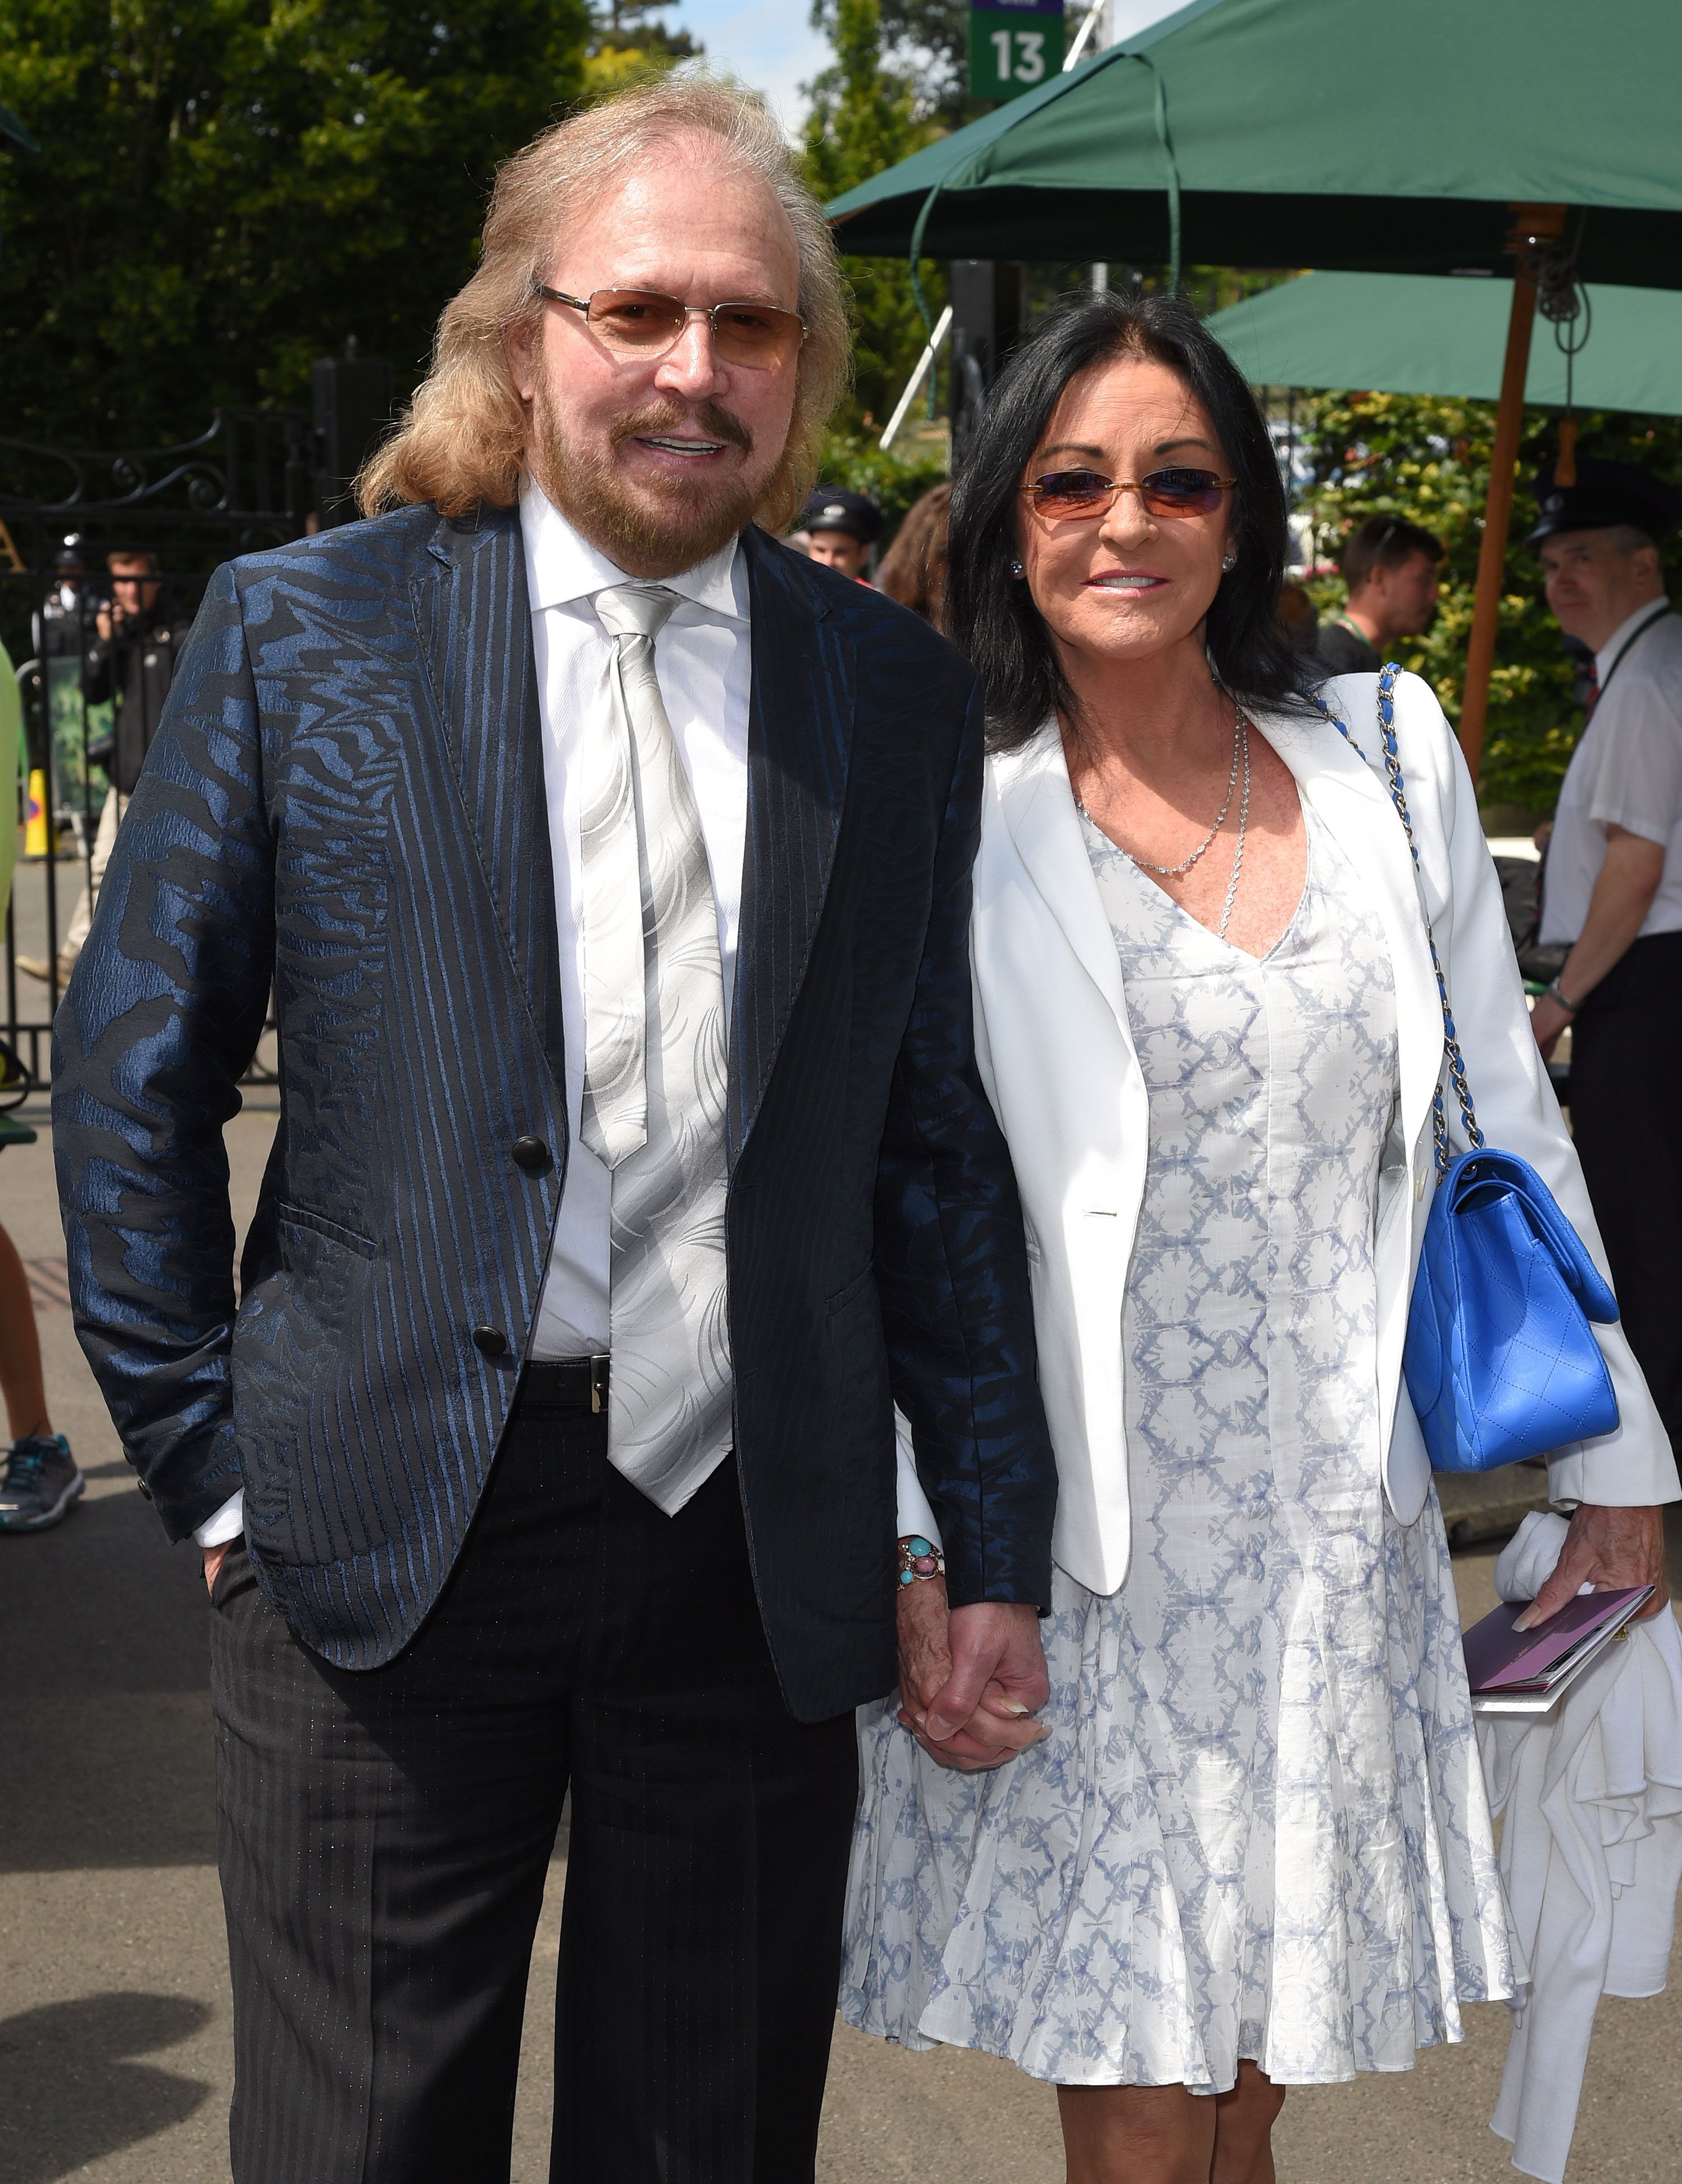 Barry Gibb and Linda Gray at the Wimbledon Tennis Championships in London, 2016 | Source: Getty Images